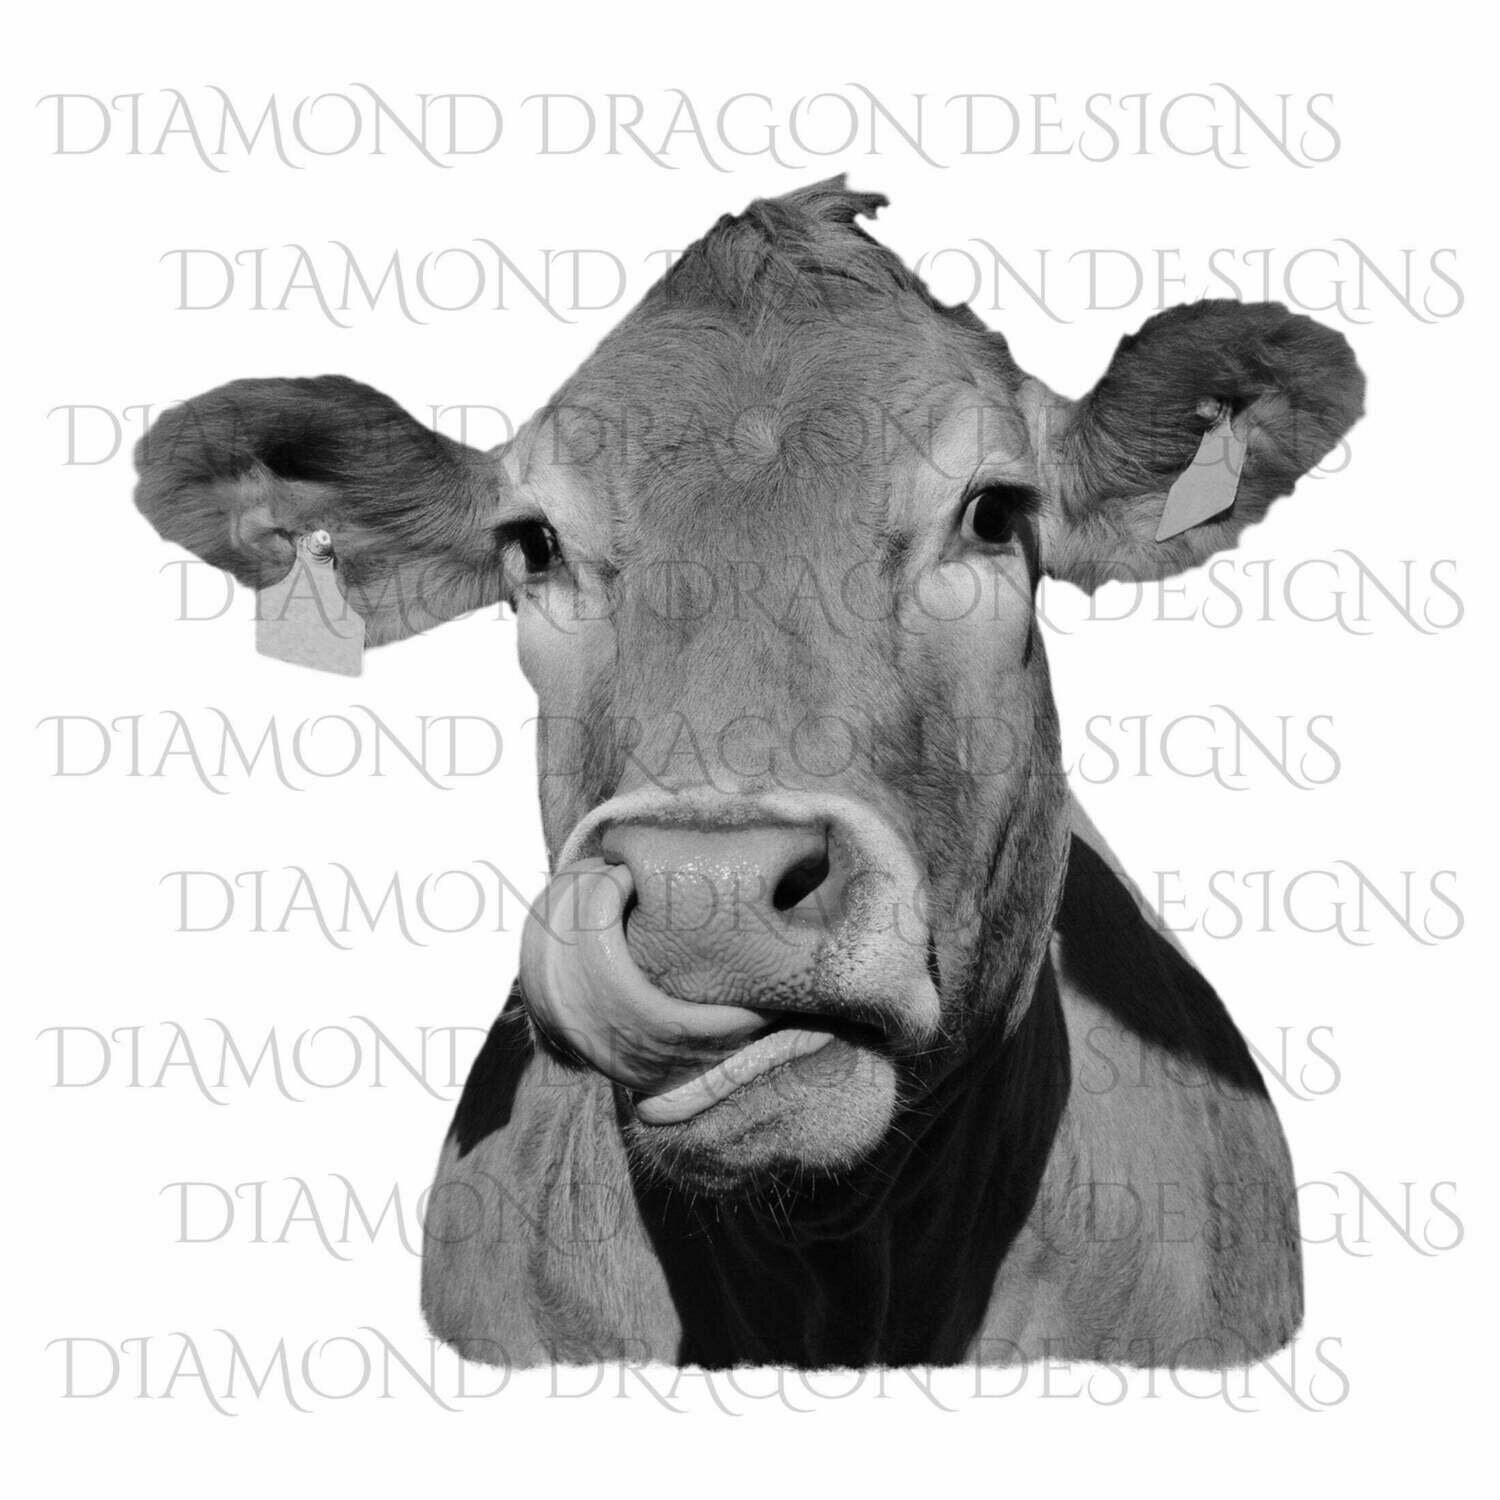 Cows - Heifer, Image, Cute Cow with Cow Lick, Cow Tongue Out, Heifer,Black & White, Digital Image